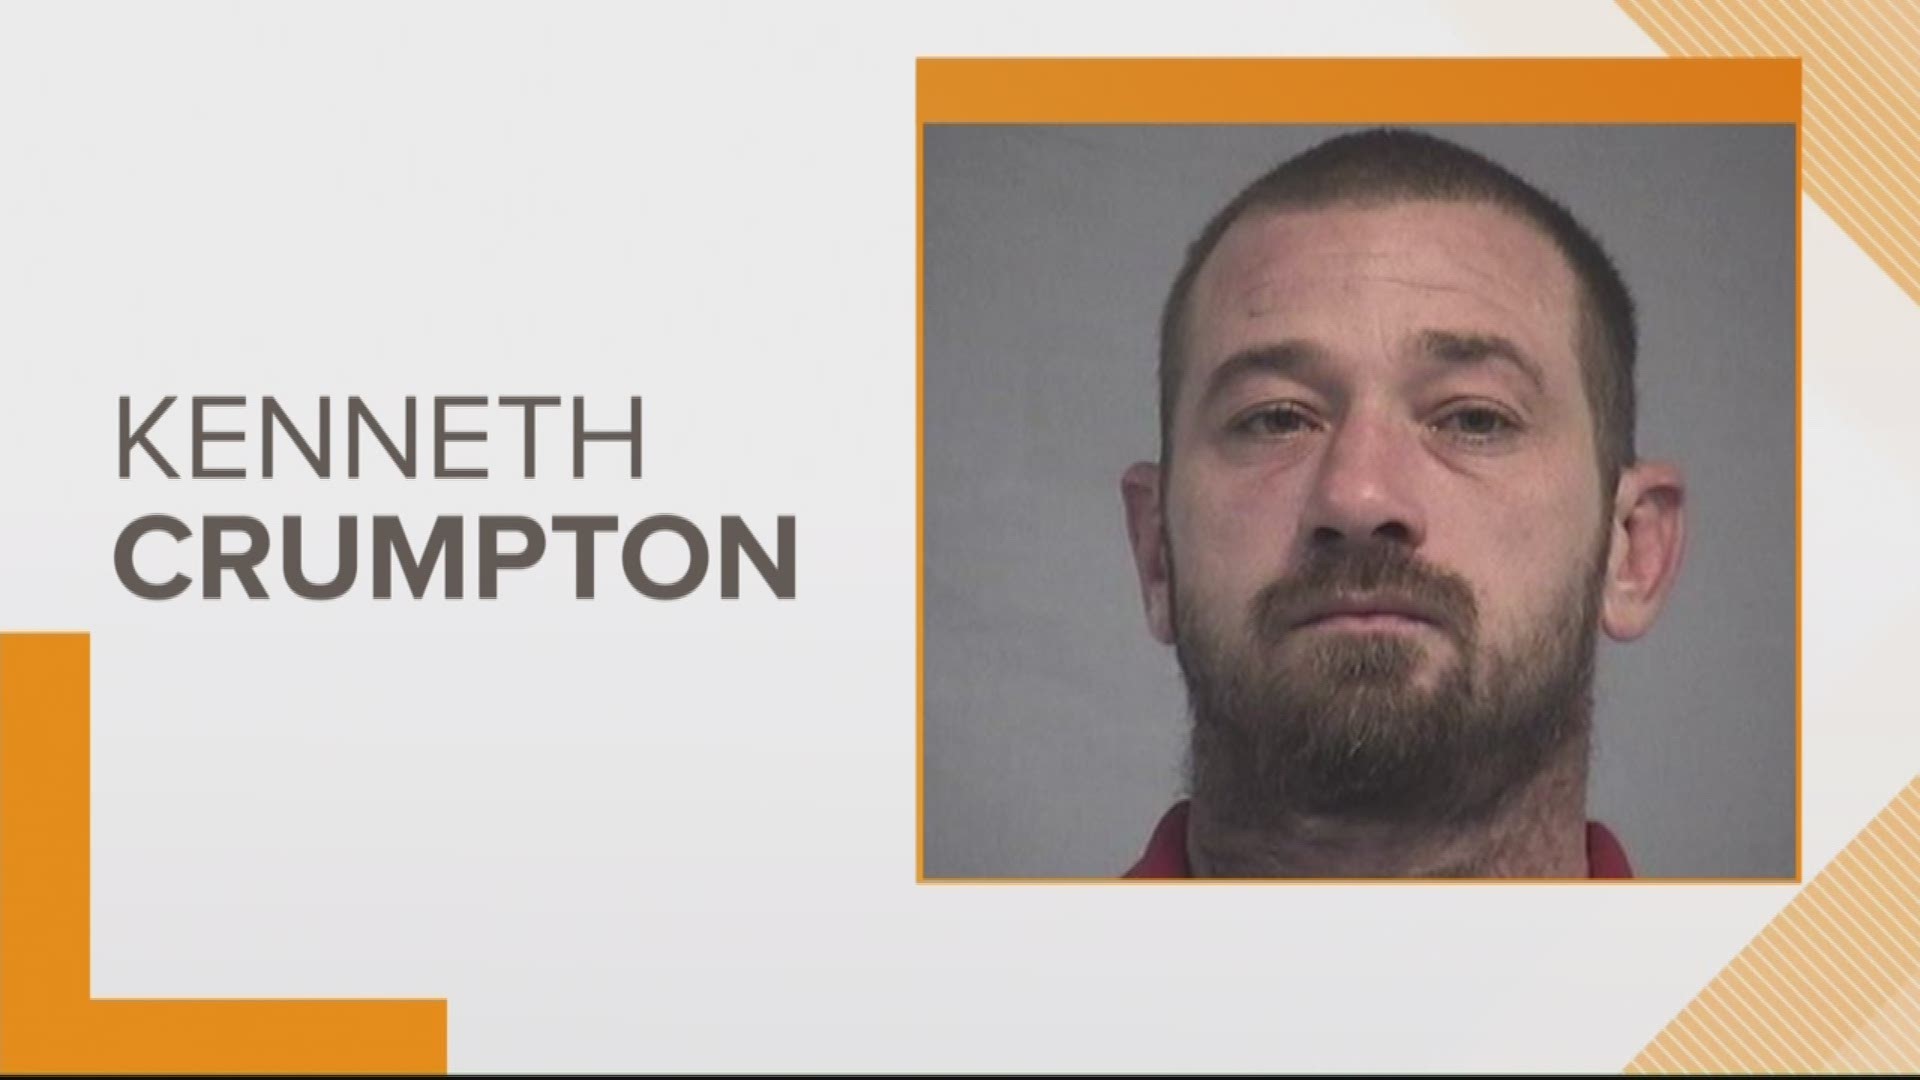 Kenneth David Crumpton Jr., 36, has been charged with aggravated battery with a deadly weapon after Nassau County deputies say he stabbed a woman in the head with a fork in a dispute over a baked potato.